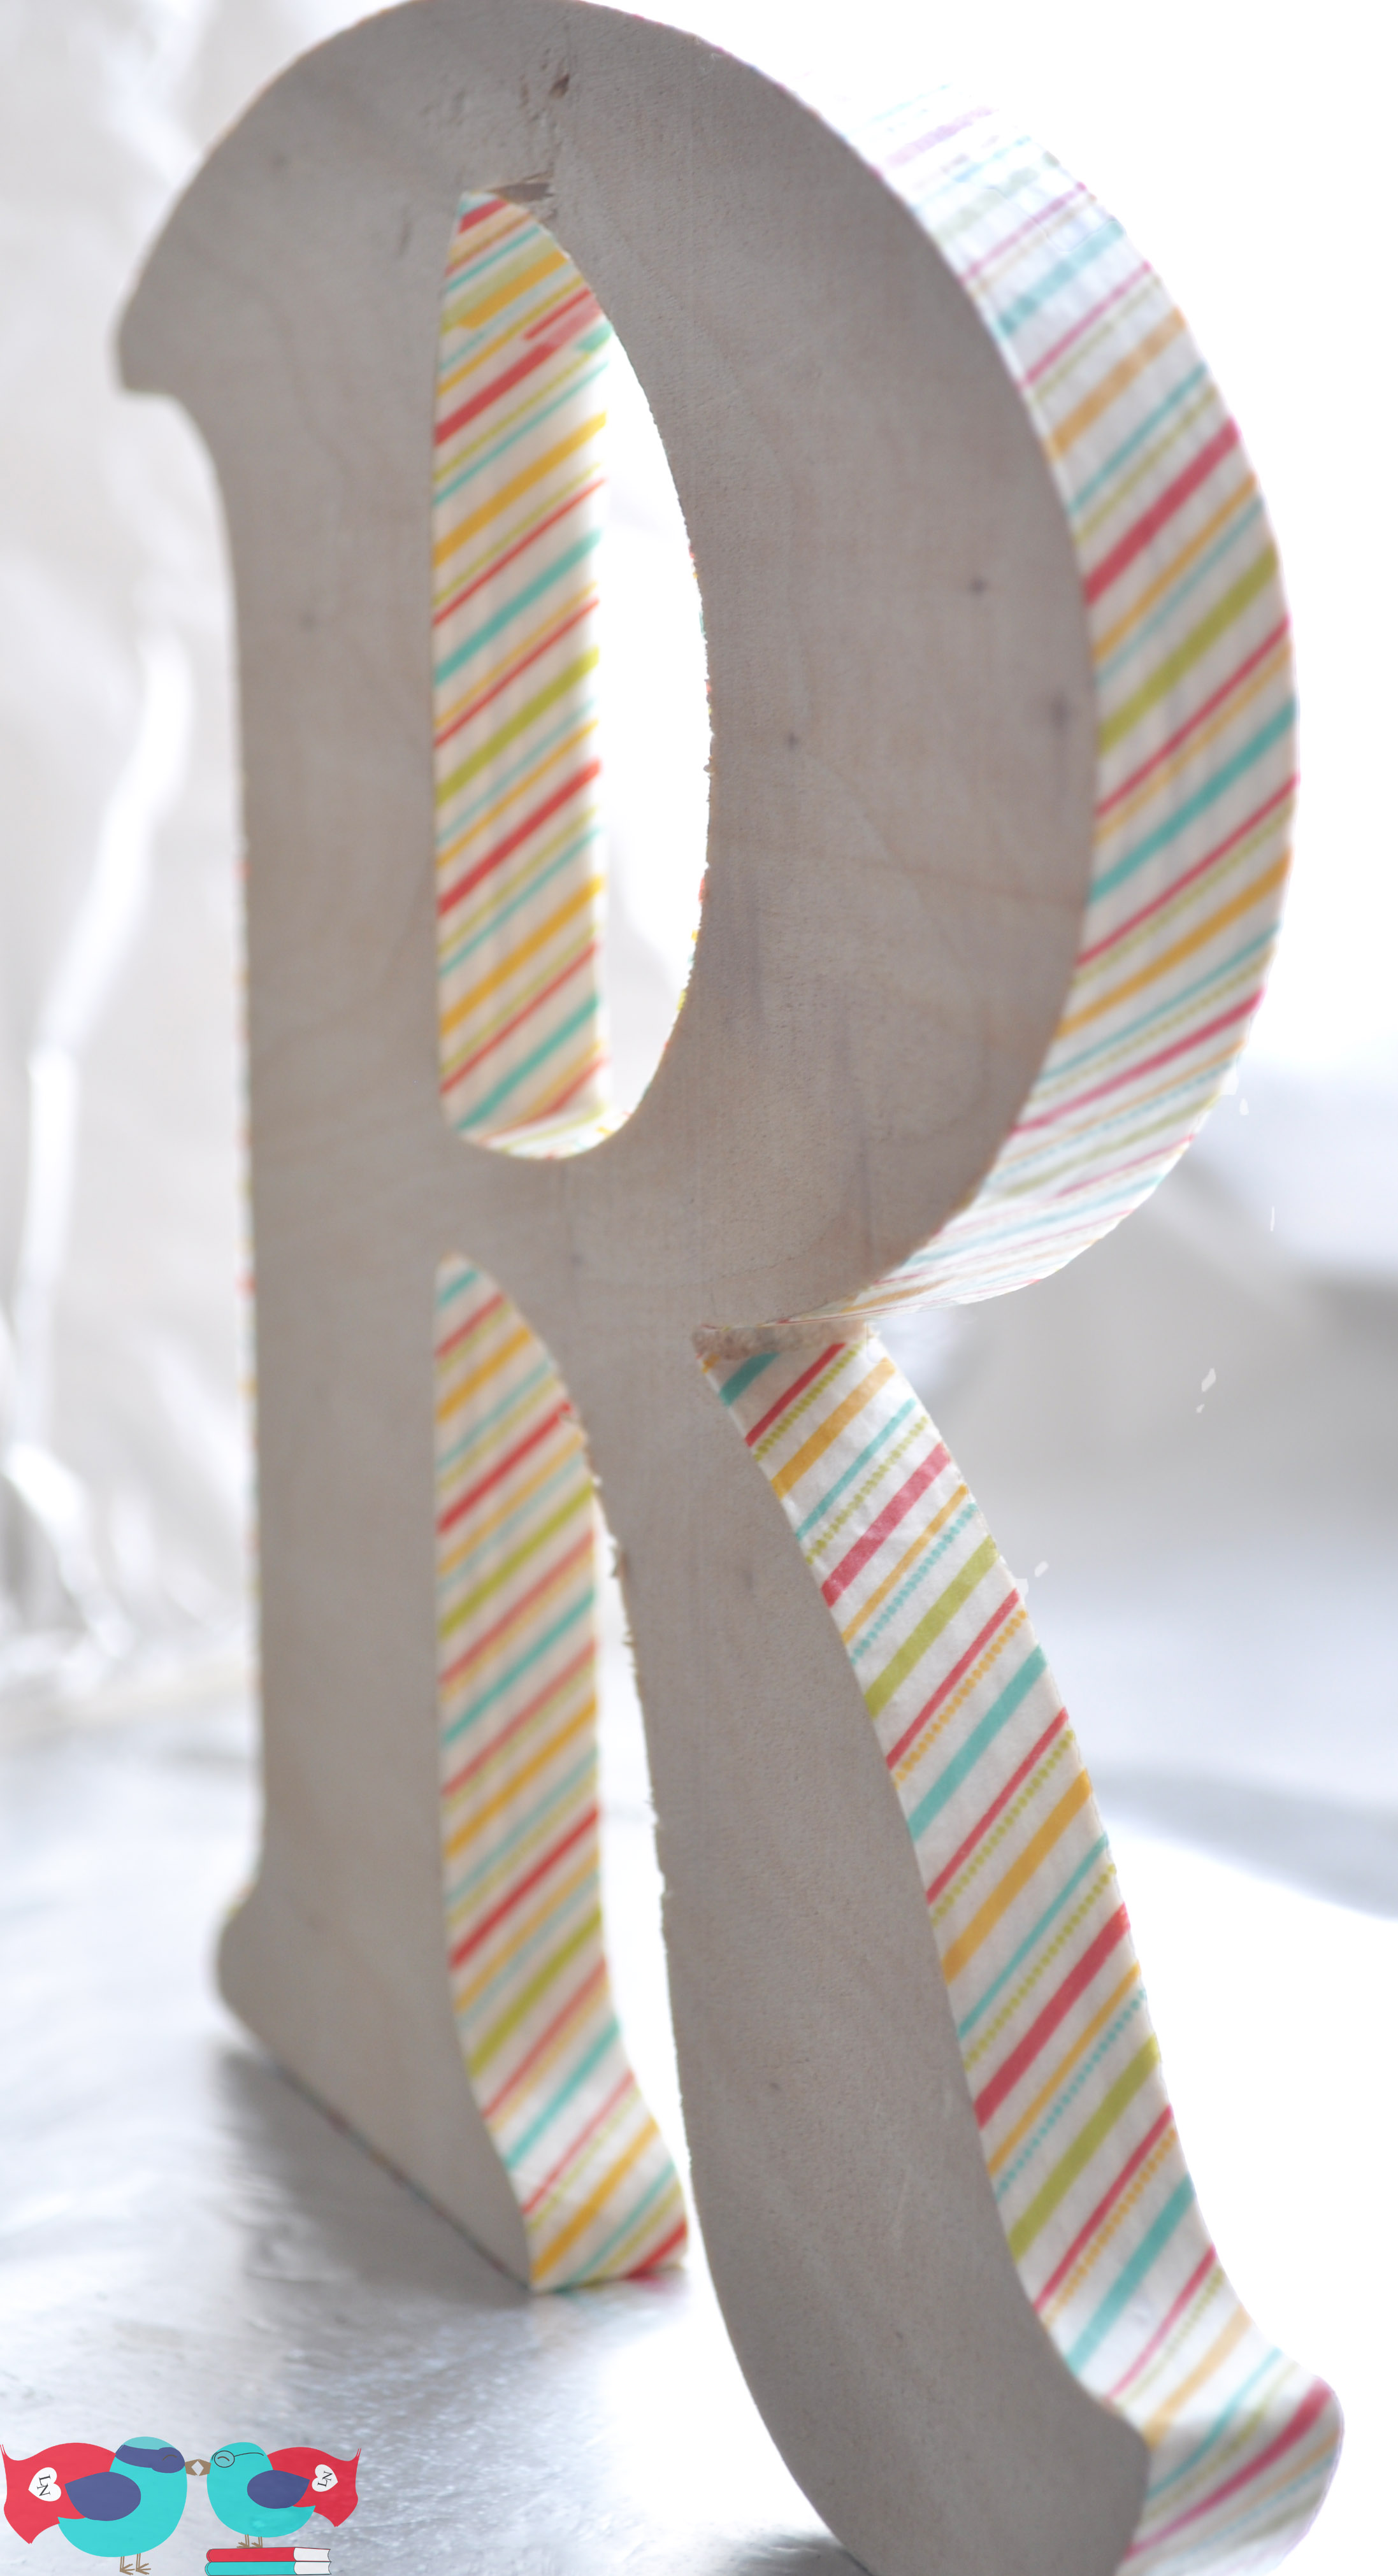 https://thelovenerds.com/wp-content/uploads/2013/05/Wooden-Letter-with-washi-tape-on-edges-2.jpg